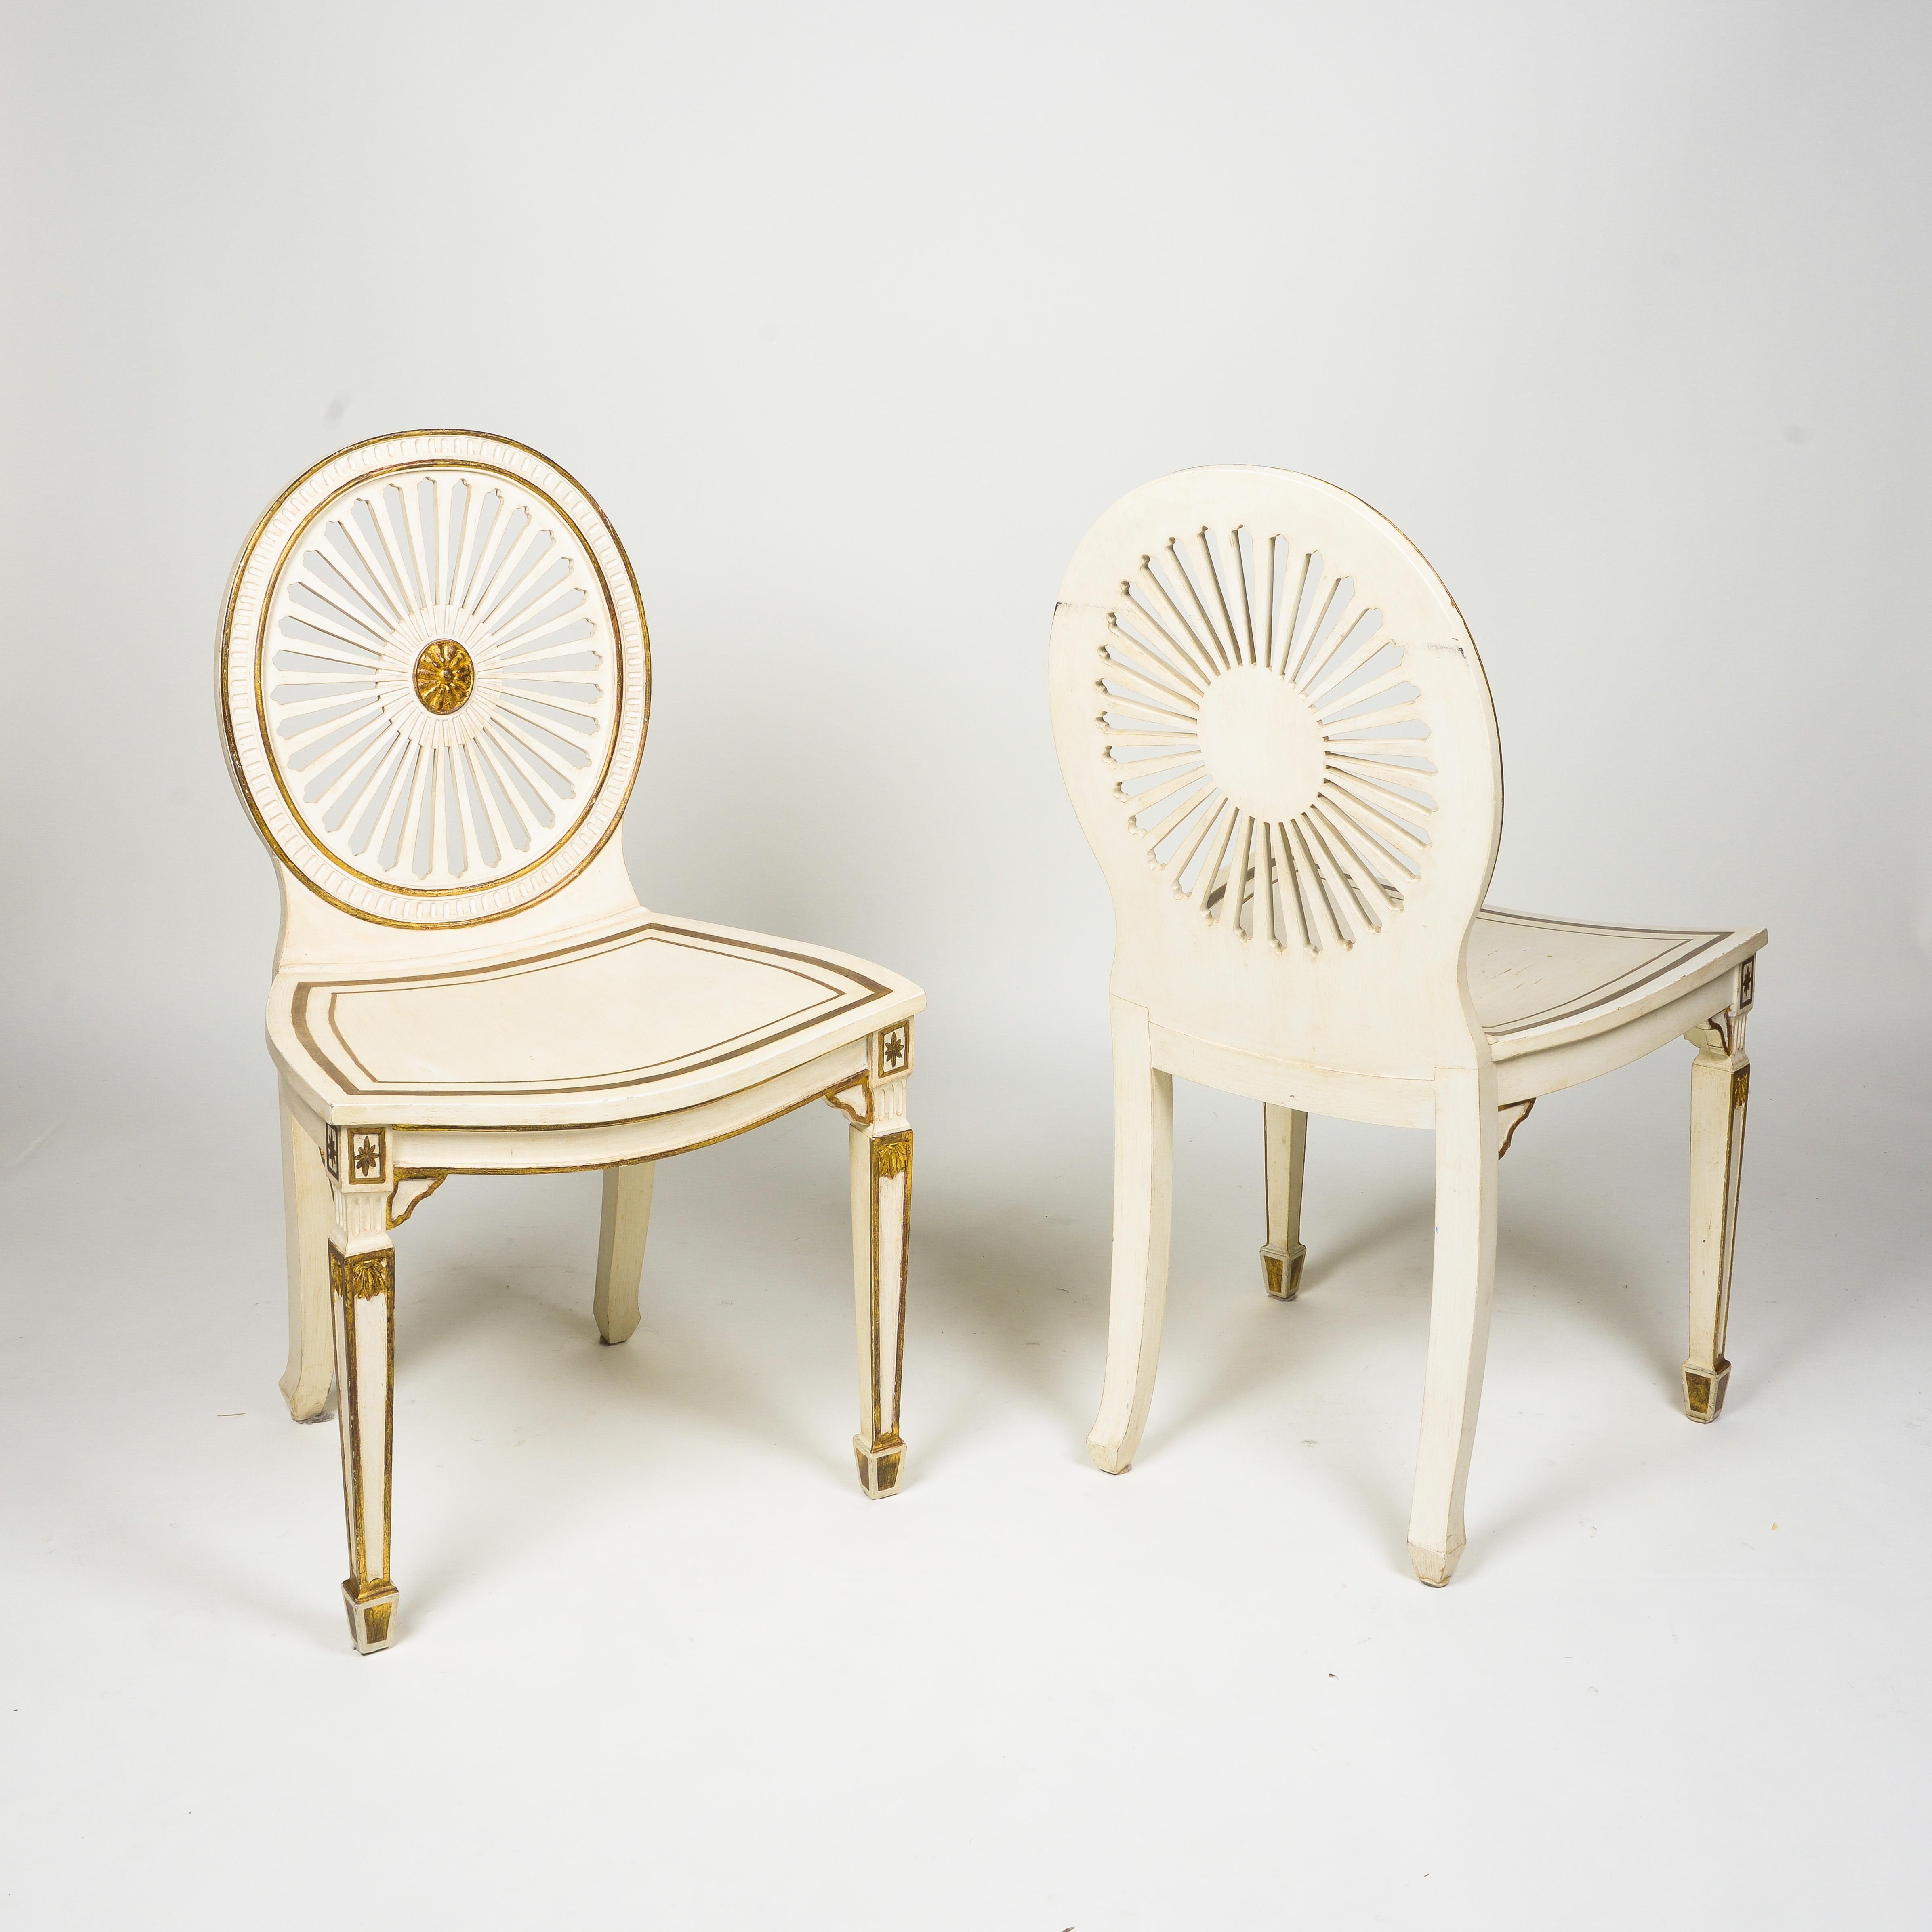 European Pair of Neoclassical Style White and Polychrome Hall Chairs For Sale